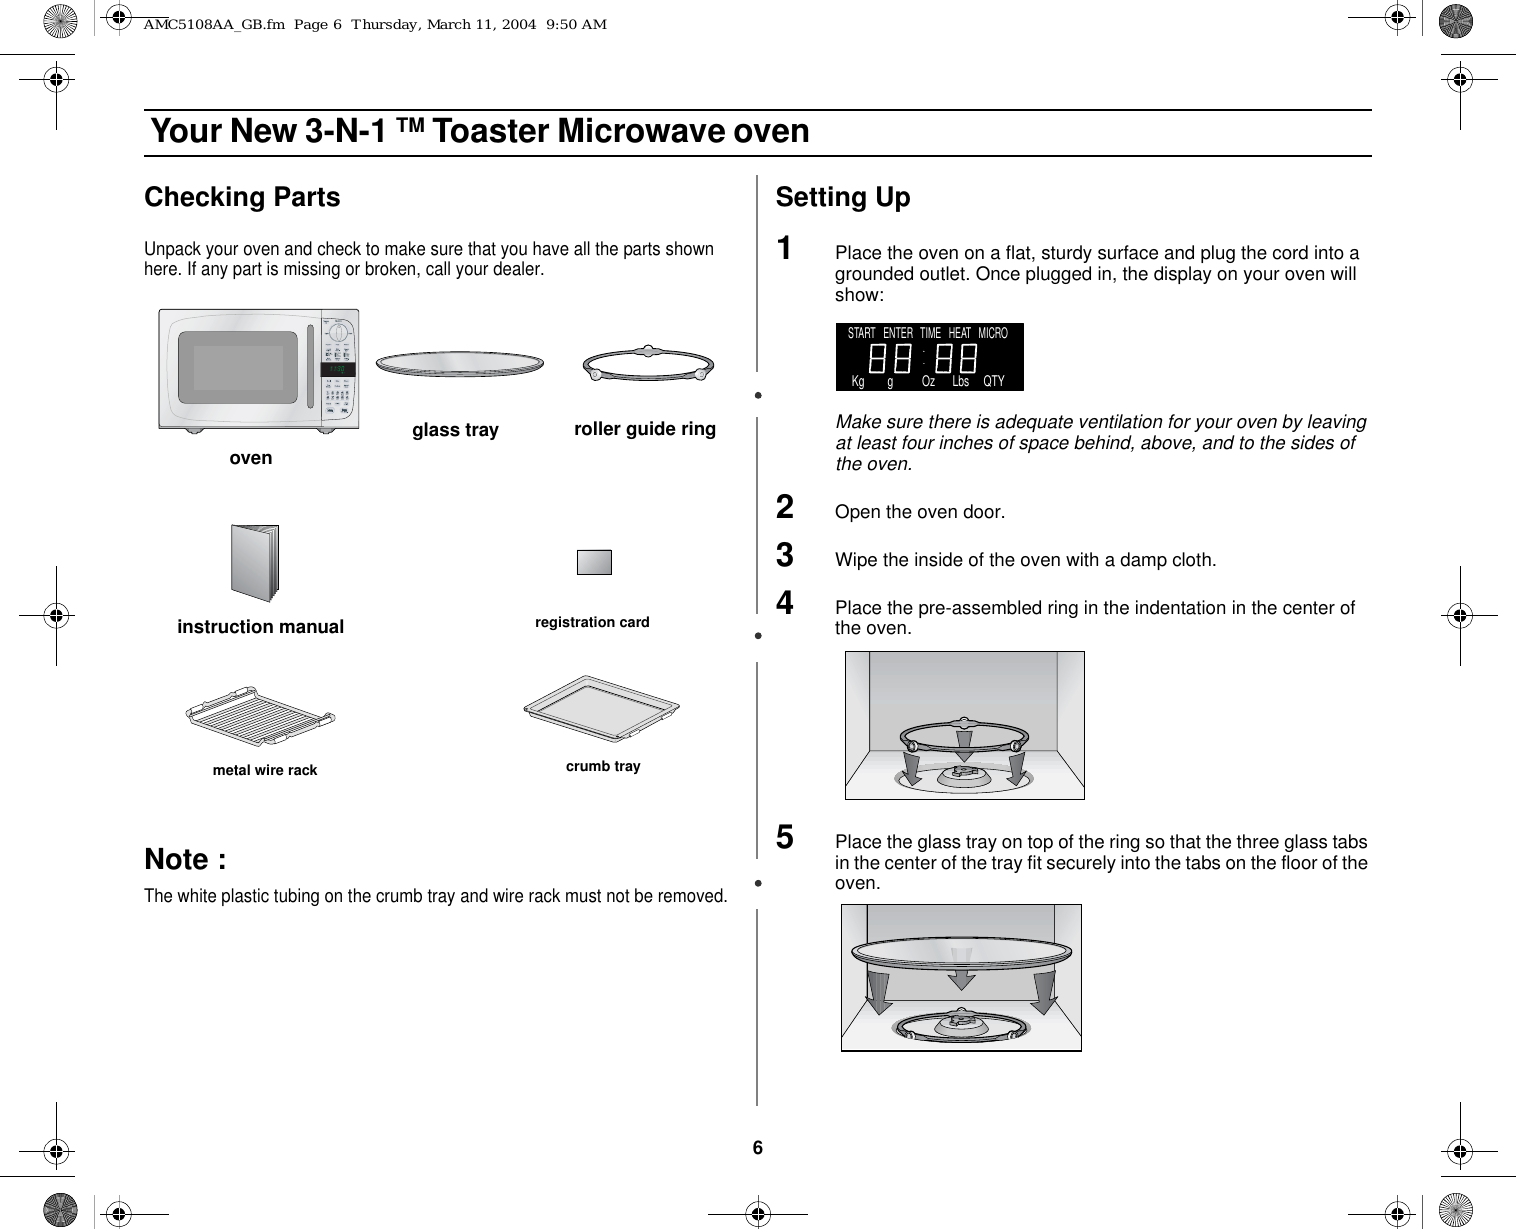 6 Your New 3-N-1 TM Toaster Microwave ovenChecking PartsUnpack your oven and check to make sure that you have all the parts shown here. If any part is missing or broken, call your dealer.Note :  The white plastic tubing on the crumb tray and wire rack must not be removed.Setting Up1Place the oven on a flat, sturdy surface and plug the cord into a grounded outlet. Once plugged in, the display on your oven will show:Make sure there is adequate ventilation for your oven by leaving at least four inches of space behind, above, and to the sides of the oven. 2Open the oven door.3Wipe the inside of the oven with a damp cloth.4Place the pre-assembled ring in the indentation in the center of the oven.5Place the glass tray on top of the ring so that the three glass tabs in the center of the tray fit securely into the tabs on the floor of the oven.ovenglass tray roller guide ring metal wire rack crumb trayinstruction manual registration cardSTART   ENTER   TIME   HEAT   MICRO    Kg        g          Oz      Lbs     QTYAMC5108AA_GB.fm  Page 6  Thursday, March 11, 2004  9:50 AM